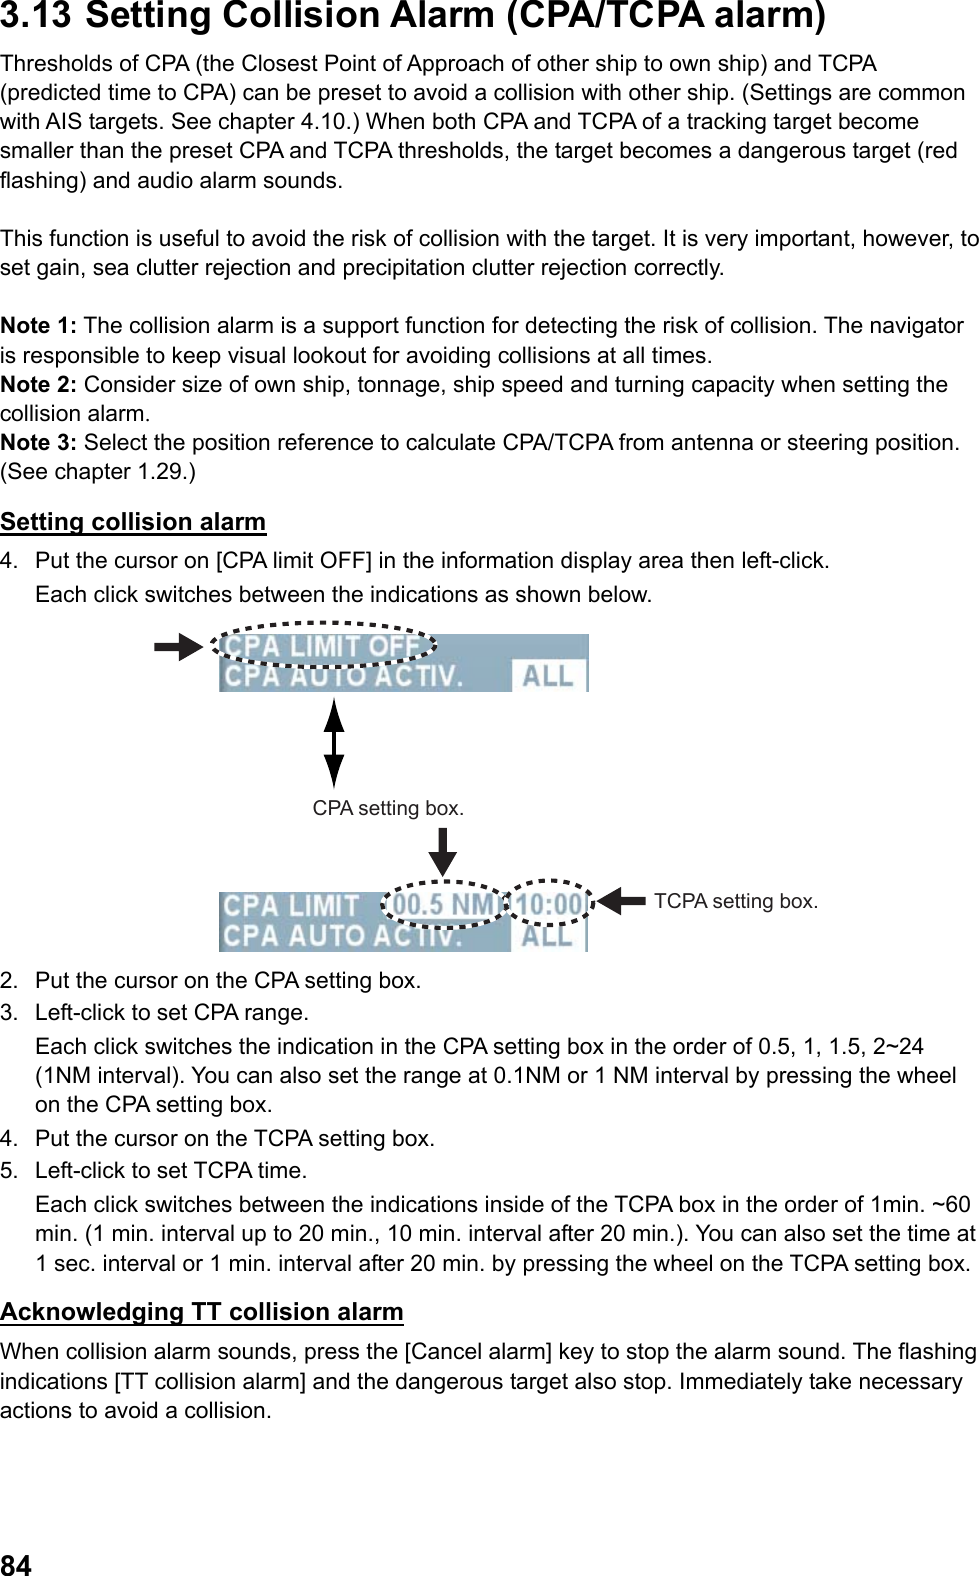  843.13  Setting Collision Alarm (CPA/TCPA alarm) Thresholds of CPA (the Closest Point of Approach of other ship to own ship) and TCPA (predicted time to CPA) can be preset to avoid a collision with other ship. (Settings are common with AIS targets. See chapter 4.10.) When both CPA and TCPA of a tracking target become smaller than the preset CPA and TCPA thresholds, the target becomes a dangerous target (red flashing) and audio alarm sounds.   This function is useful to avoid the risk of collision with the target. It is very important, however, to set gain, sea clutter rejection and precipitation clutter rejection correctly.  Note 1: The collision alarm is a support function for detecting the risk of collision. The navigator is responsible to keep visual lookout for avoiding collisions at all times. Note 2: Consider size of own ship, tonnage, ship speed and turning capacity when setting the collision alarm. Note 3: Select the position reference to calculate CPA/TCPA from antenna or steering position. (See chapter 1.29.) Setting collision alarm 4.  Put the cursor on [CPA limit OFF] in the information display area then left-click.  Each click switches between the indications as shown below. CPA setting box.TCPA setting box. 2.  Put the cursor on the CPA setting box. 3.  Left-click to set CPA range. Each click switches the indication in the CPA setting box in the order of 0.5, 1, 1.5, 2~24 (1NM interval). You can also set the range at 0.1NM or 1 NM interval by pressing the wheel on the CPA setting box. 4.  Put the cursor on the TCPA setting box. 5.  Left-click to set TCPA time.  Each click switches between the indications inside of the TCPA box in the order of 1min. ~60 min. (1 min. interval up to 20 min., 10 min. interval after 20 min.). You can also set the time at 1 sec. interval or 1 min. interval after 20 min. by pressing the wheel on the TCPA setting box. Acknowledging TT collision alarm When collision alarm sounds, press the [Cancel alarm] key to stop the alarm sound. The flashing indications [TT collision alarm] and the dangerous target also stop. Immediately take necessary actions to avoid a collision. 